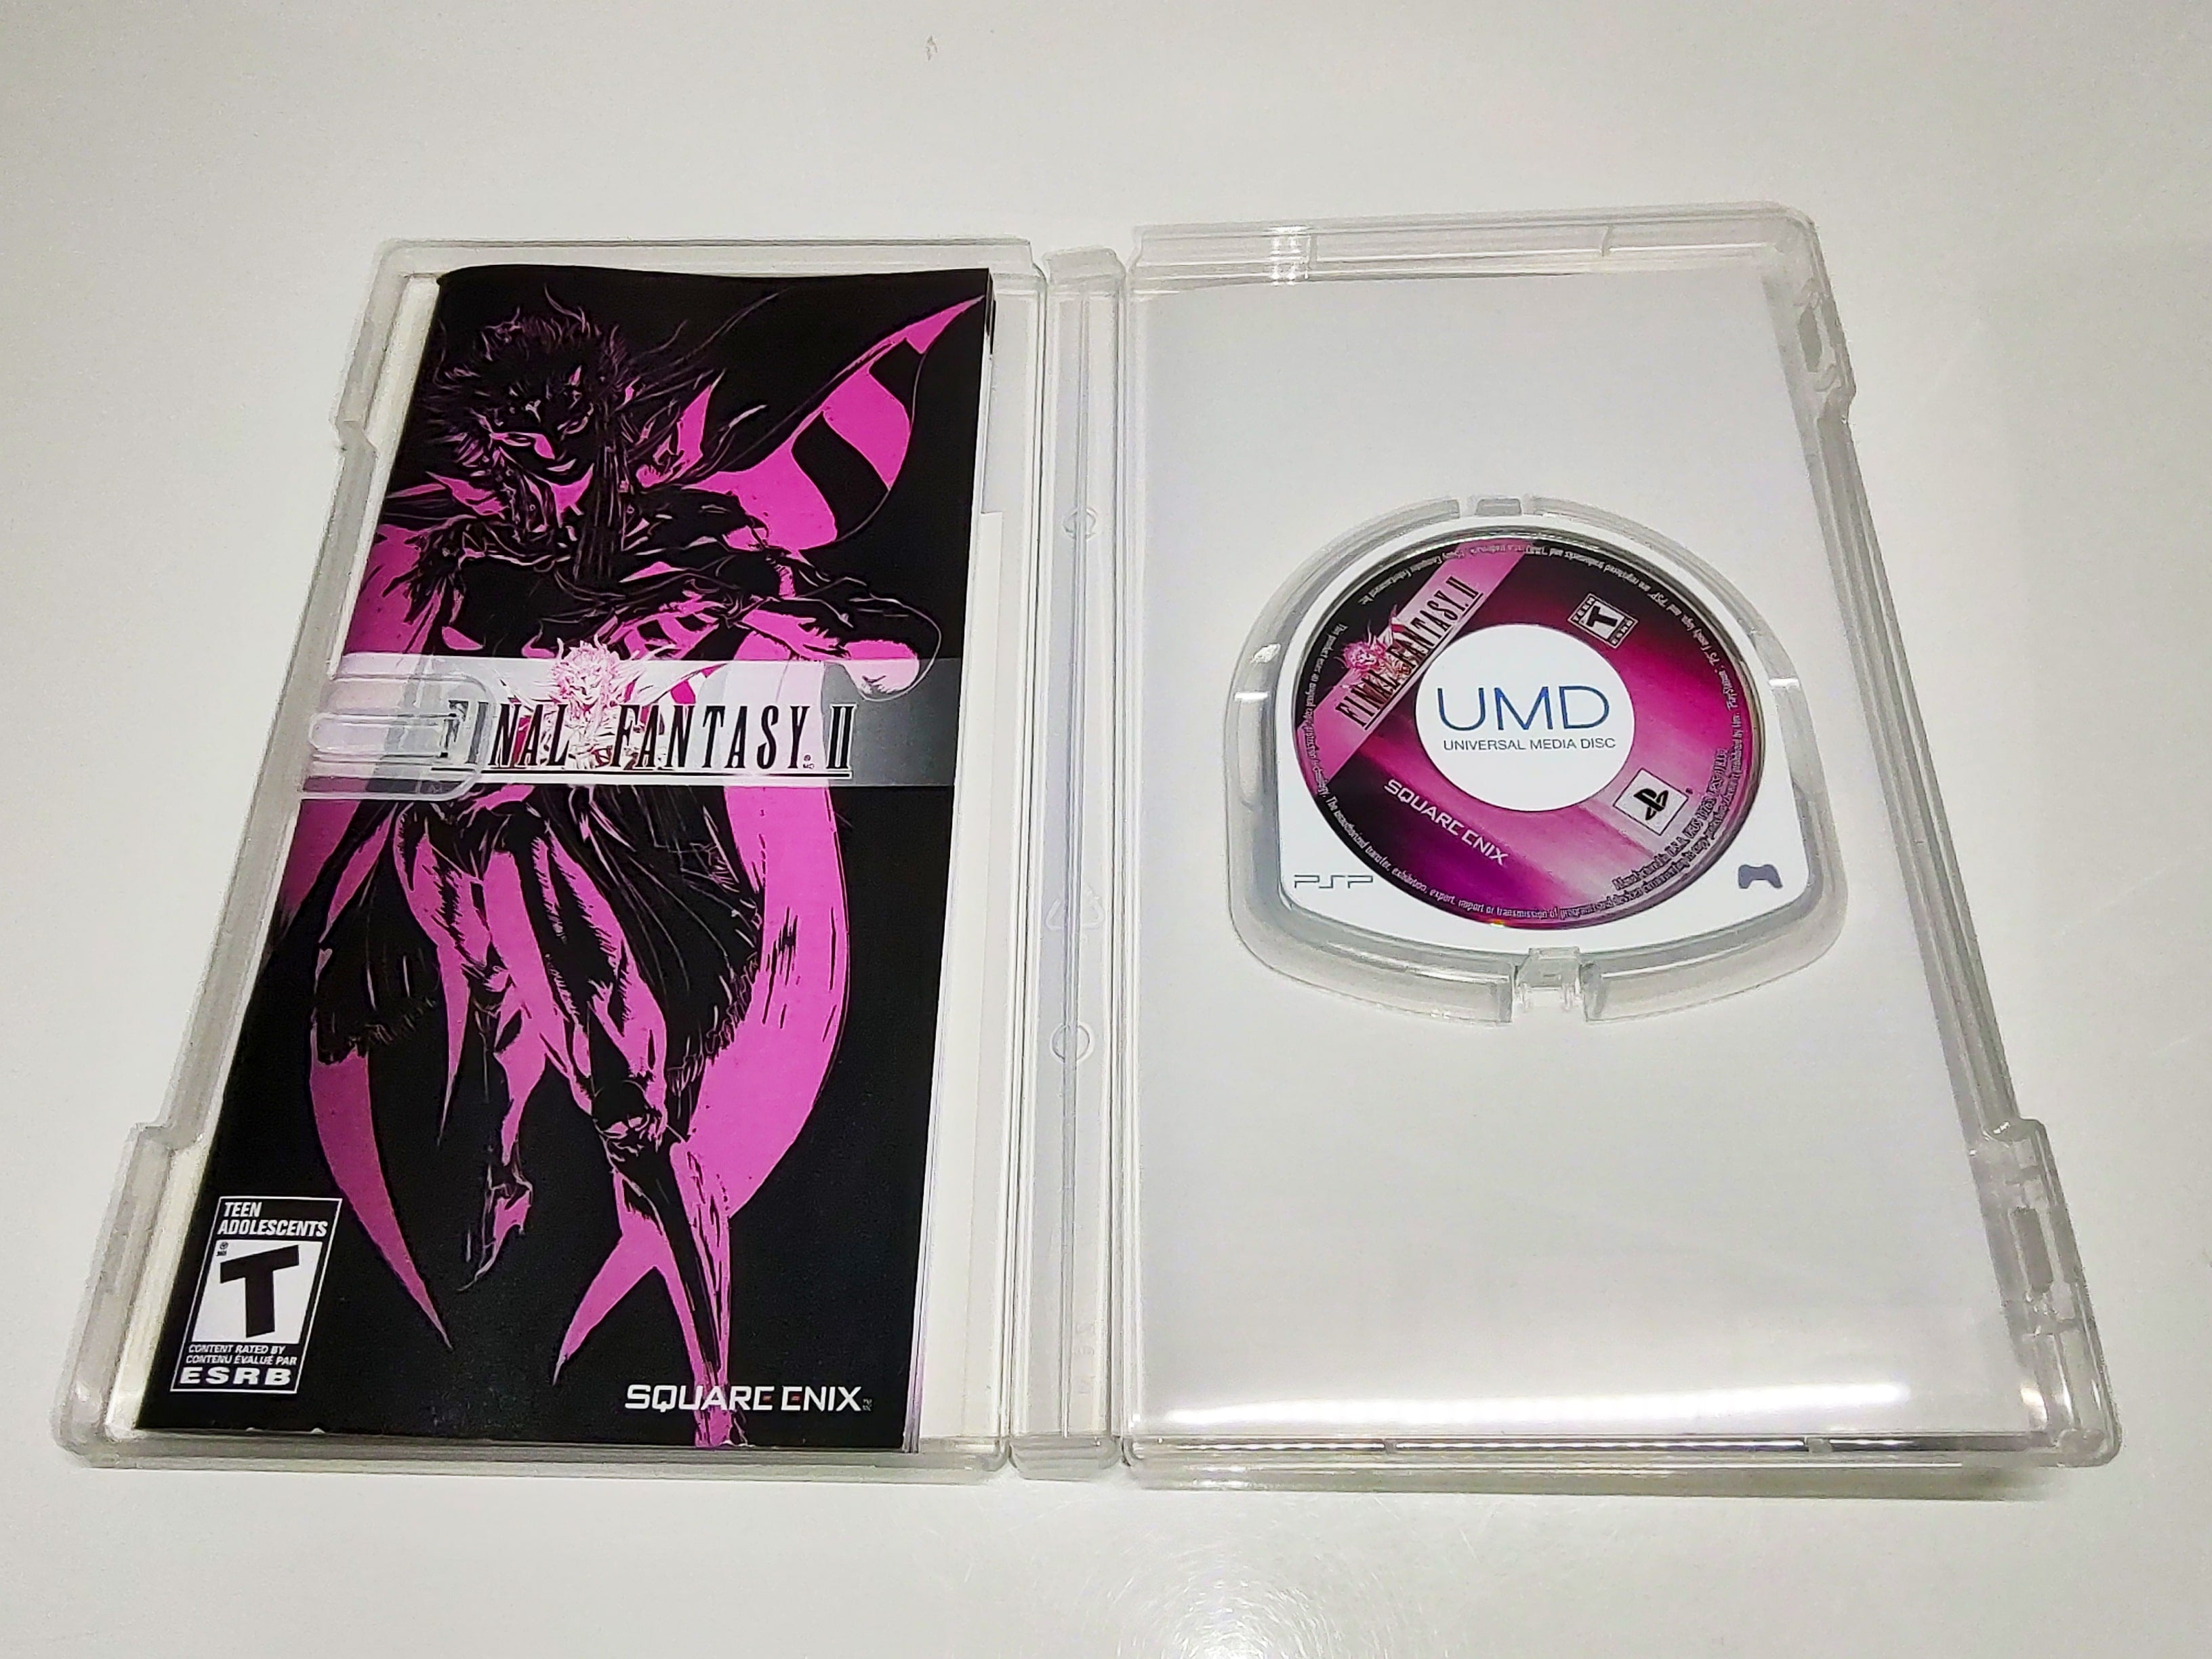 Final Fantasy II | PSP | Complete in Case | Contents